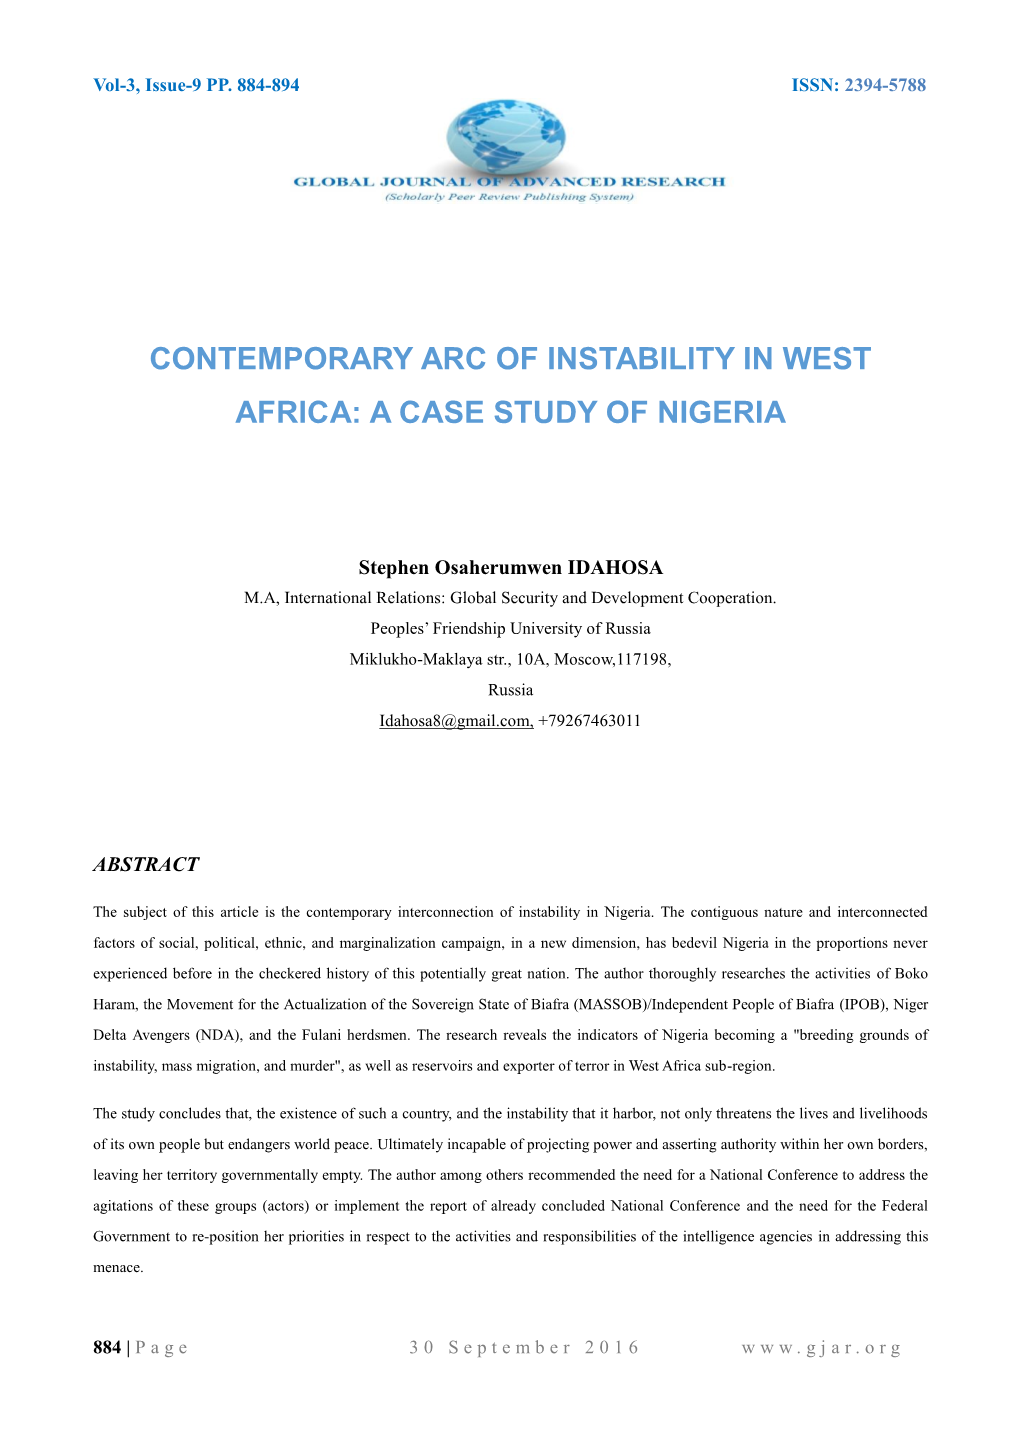 Contemporary Arc of Instability in West Africa: a Case Study of Nigeria